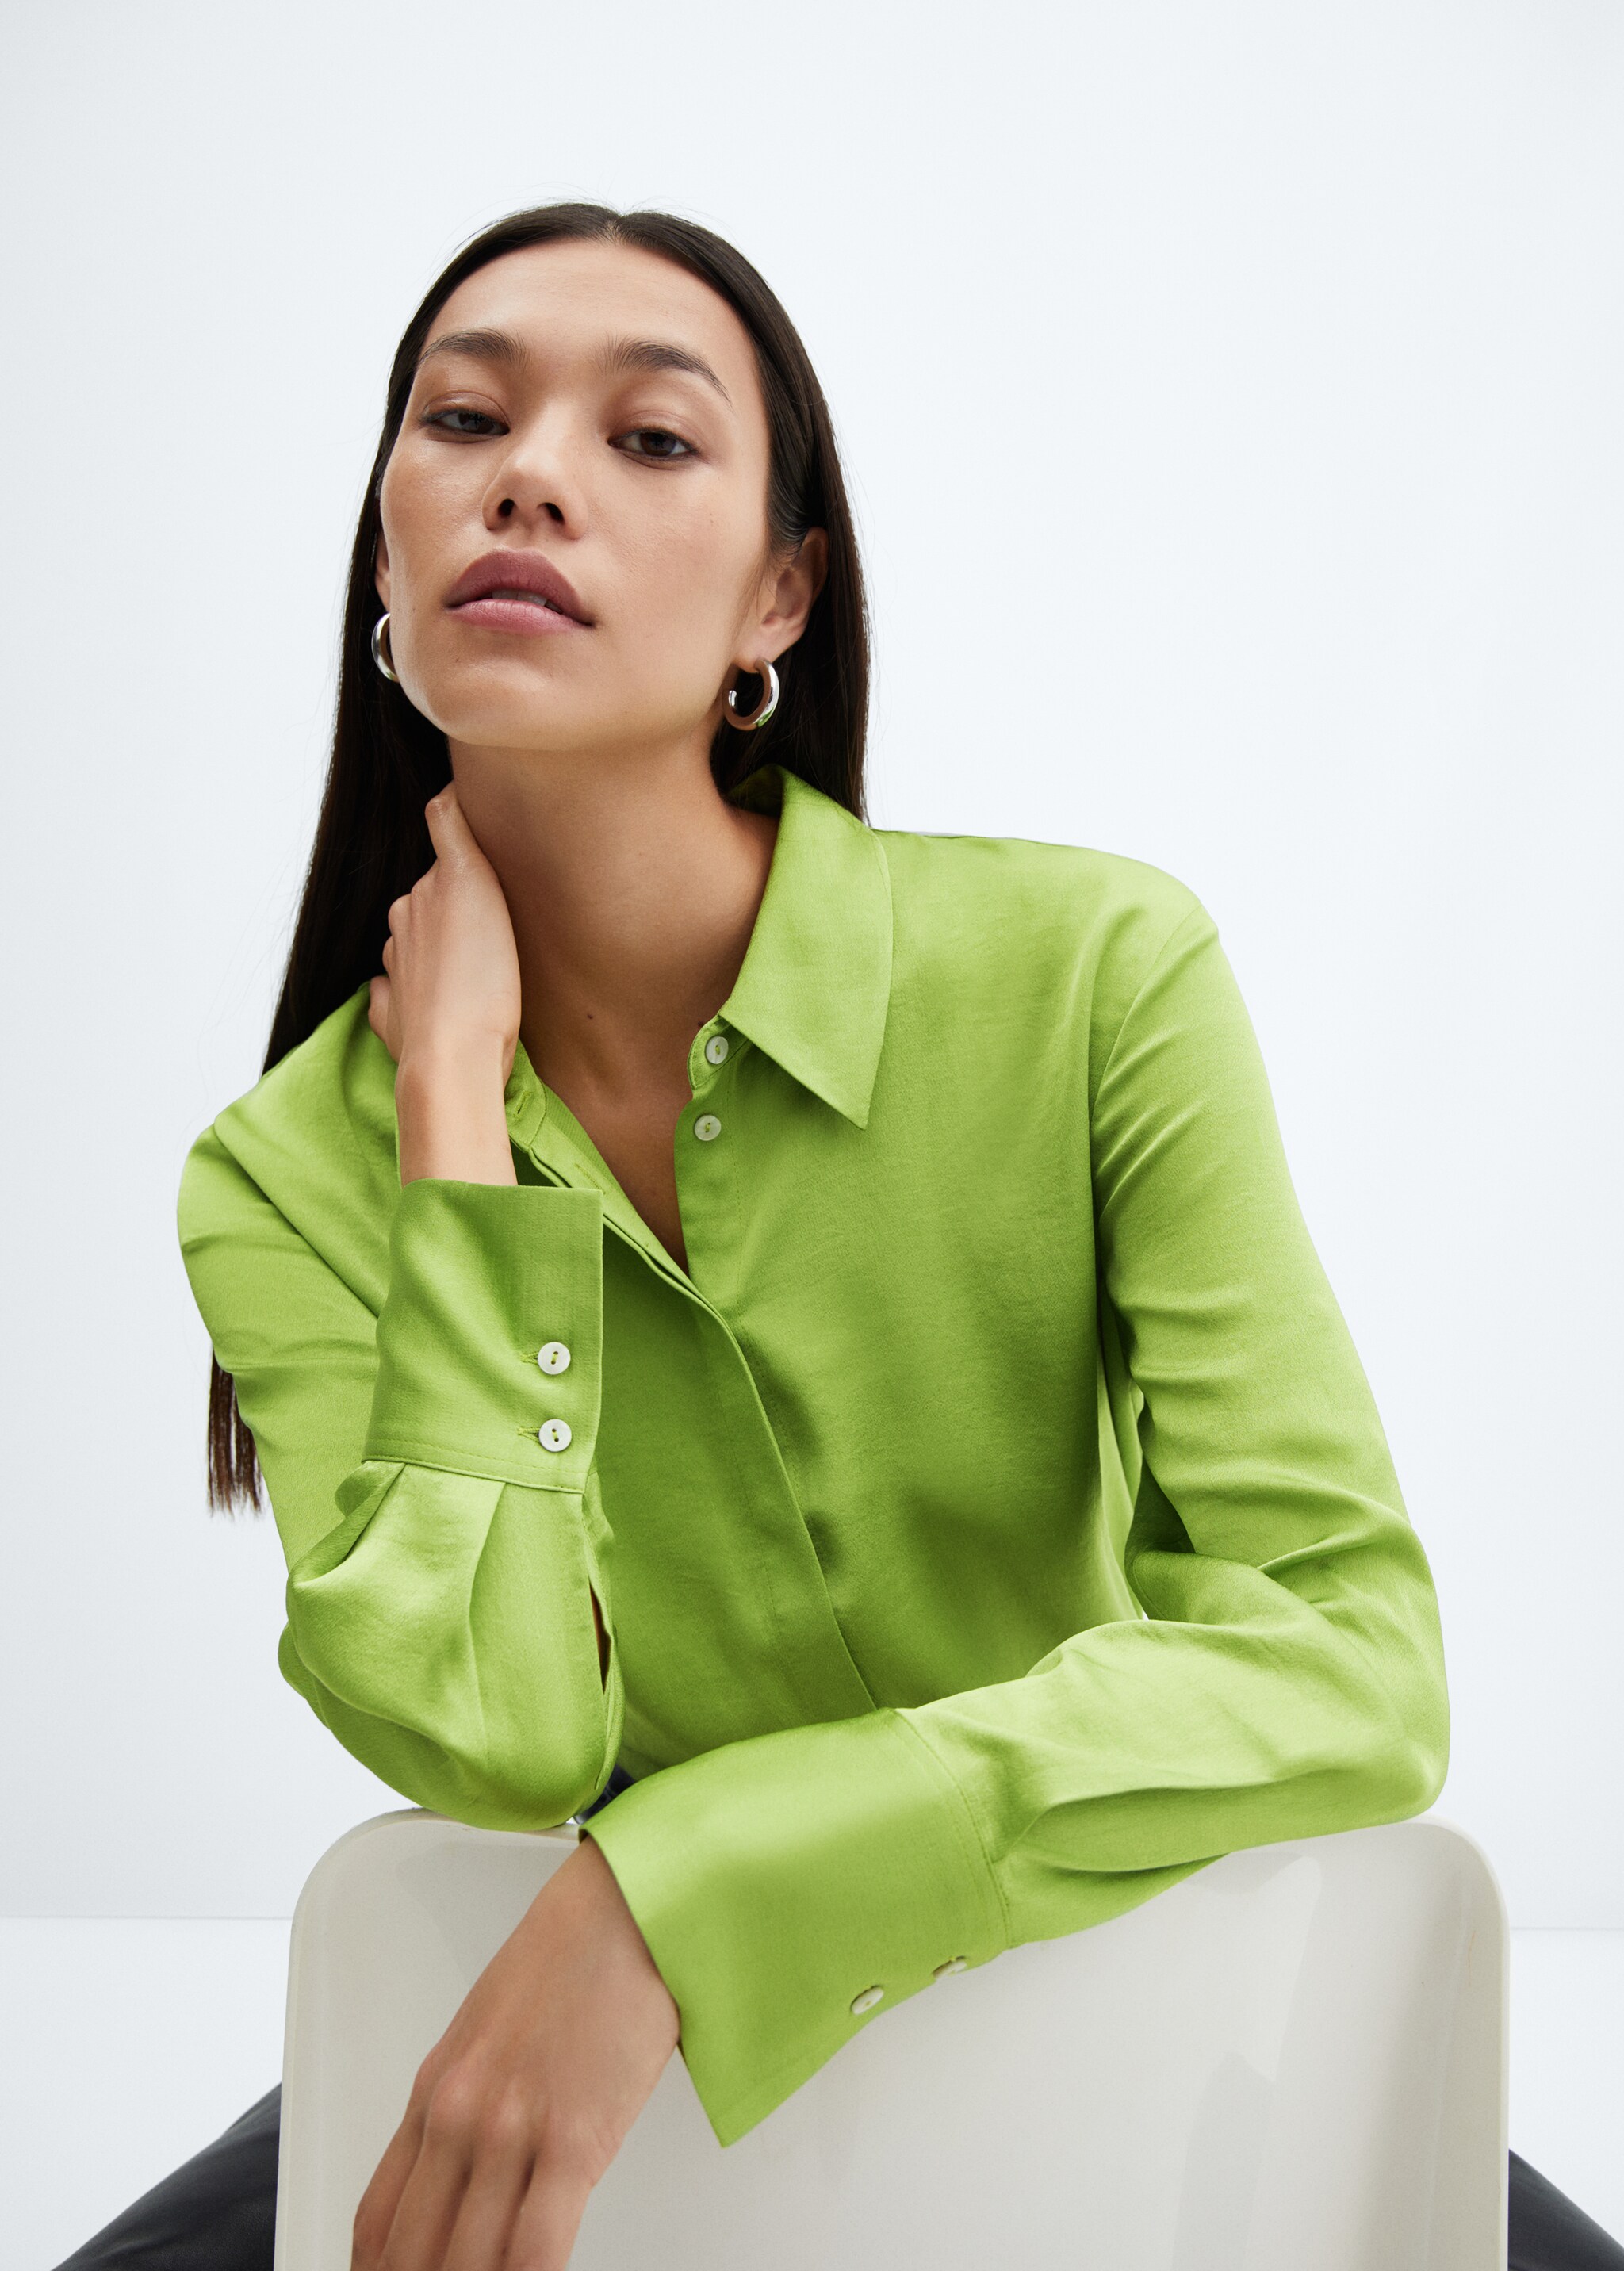 Satin finish flowy shirt - Details of the article 1